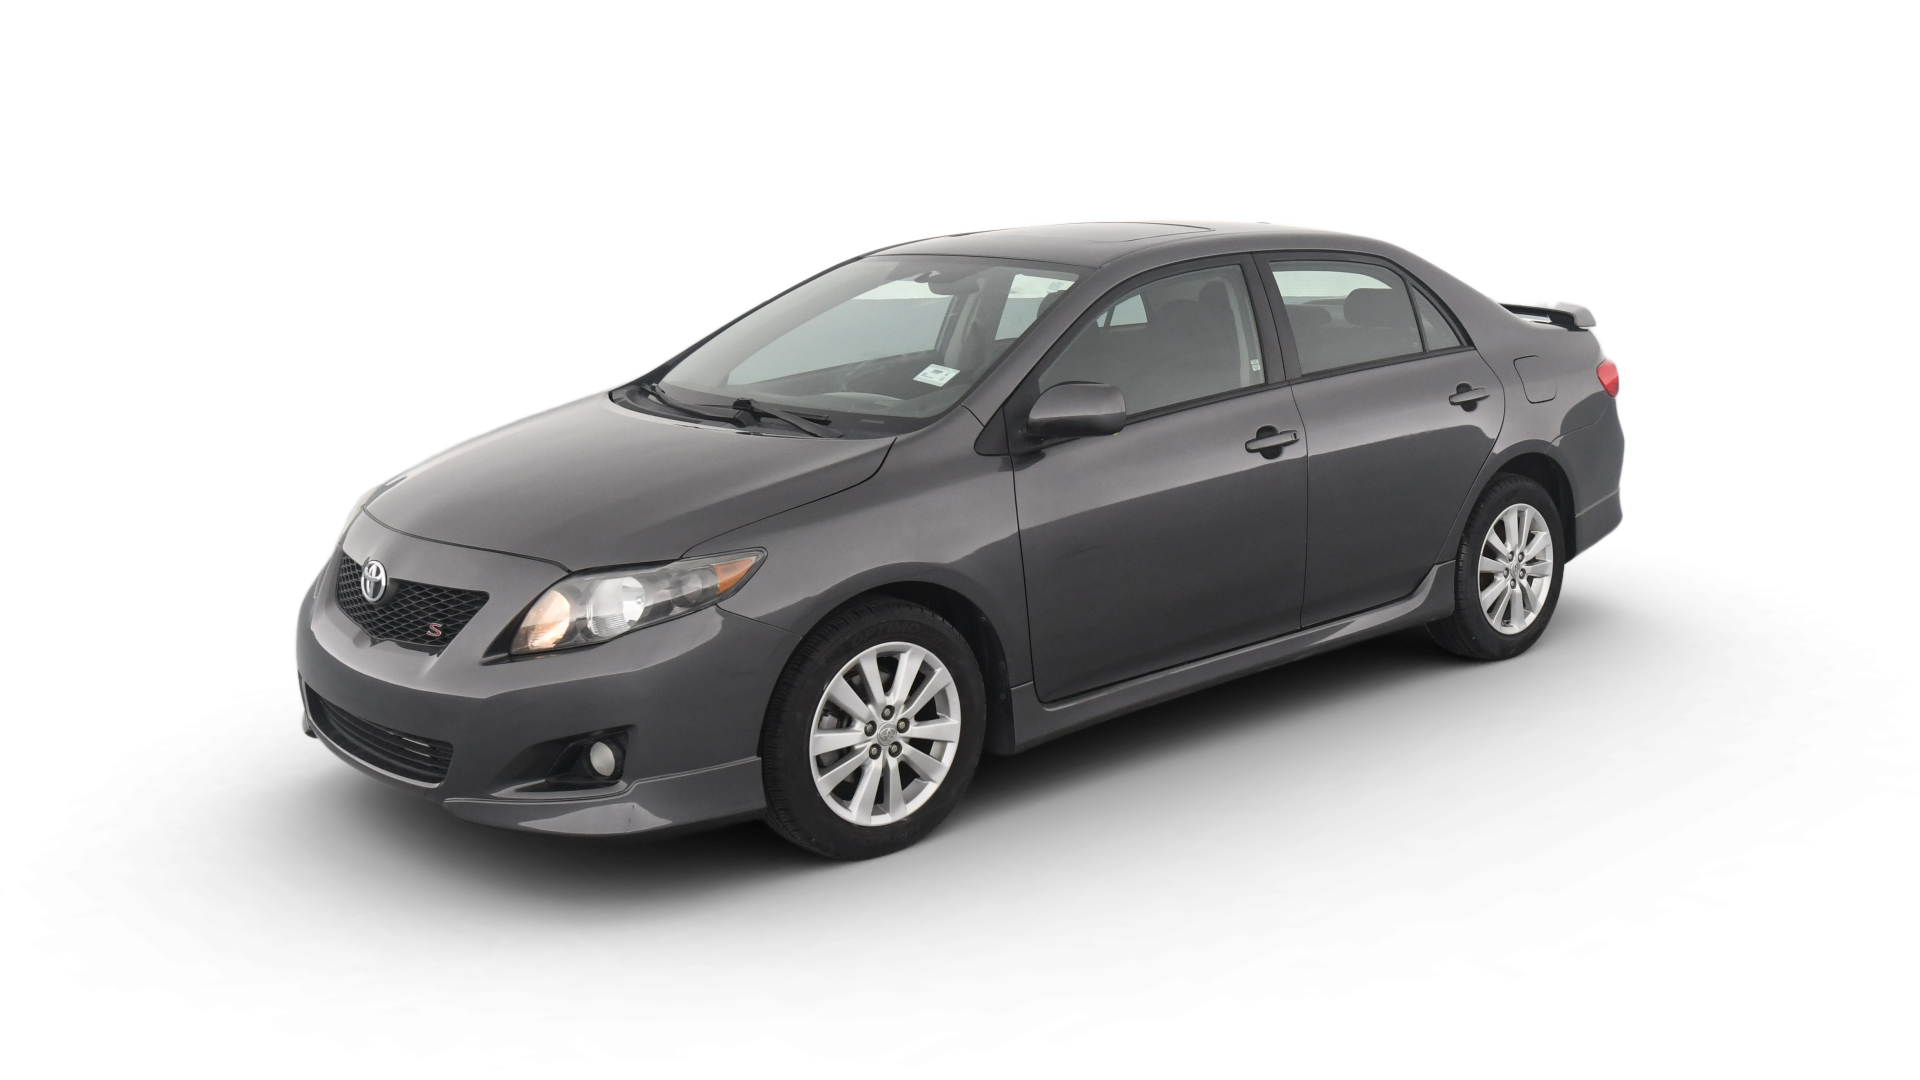 Used Toyota Corolla For Sale Online | Carvana